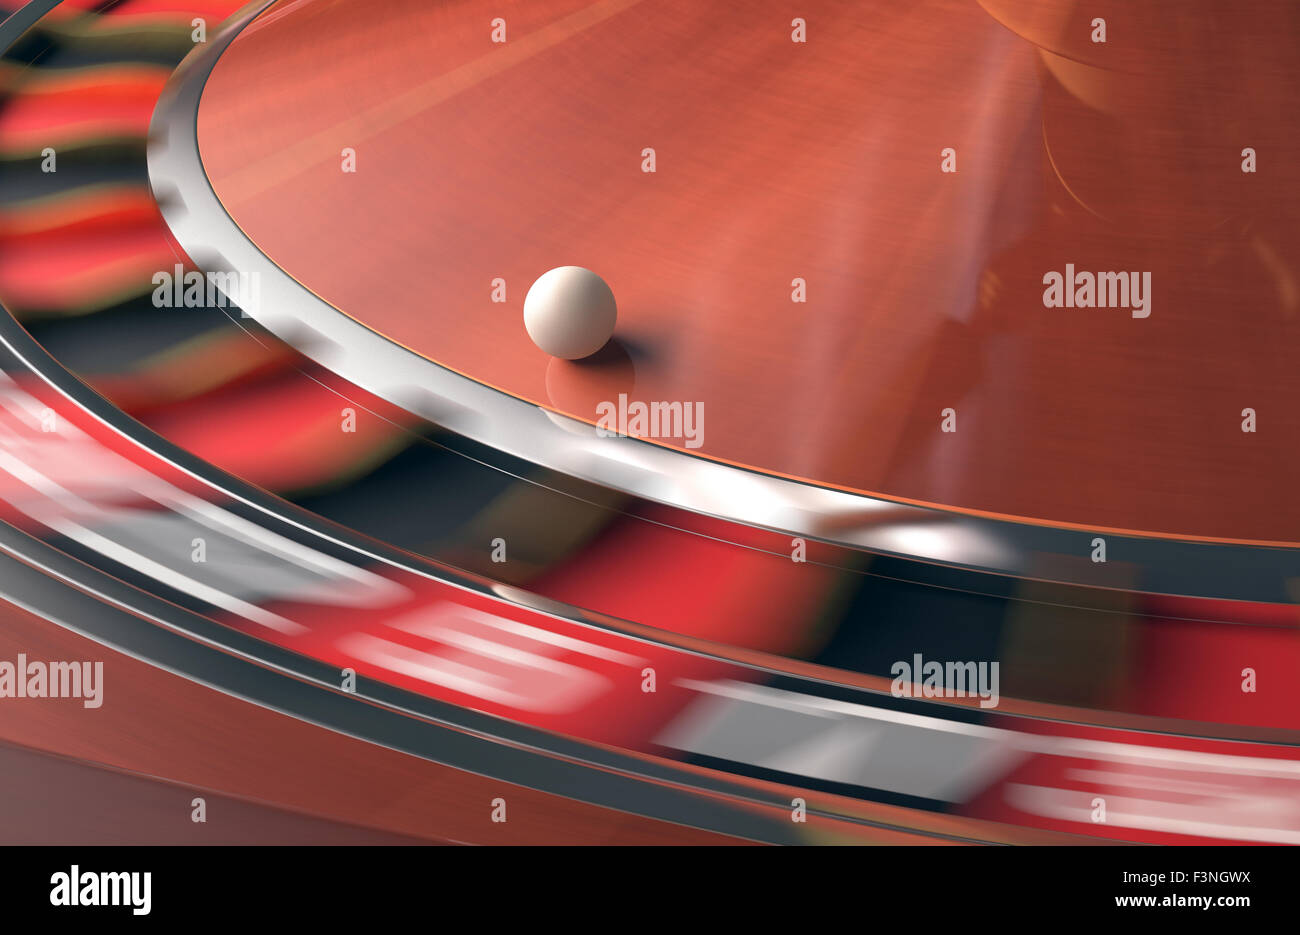 Playing roulette in the casino. Motion blur on the wheel. Stock Photo